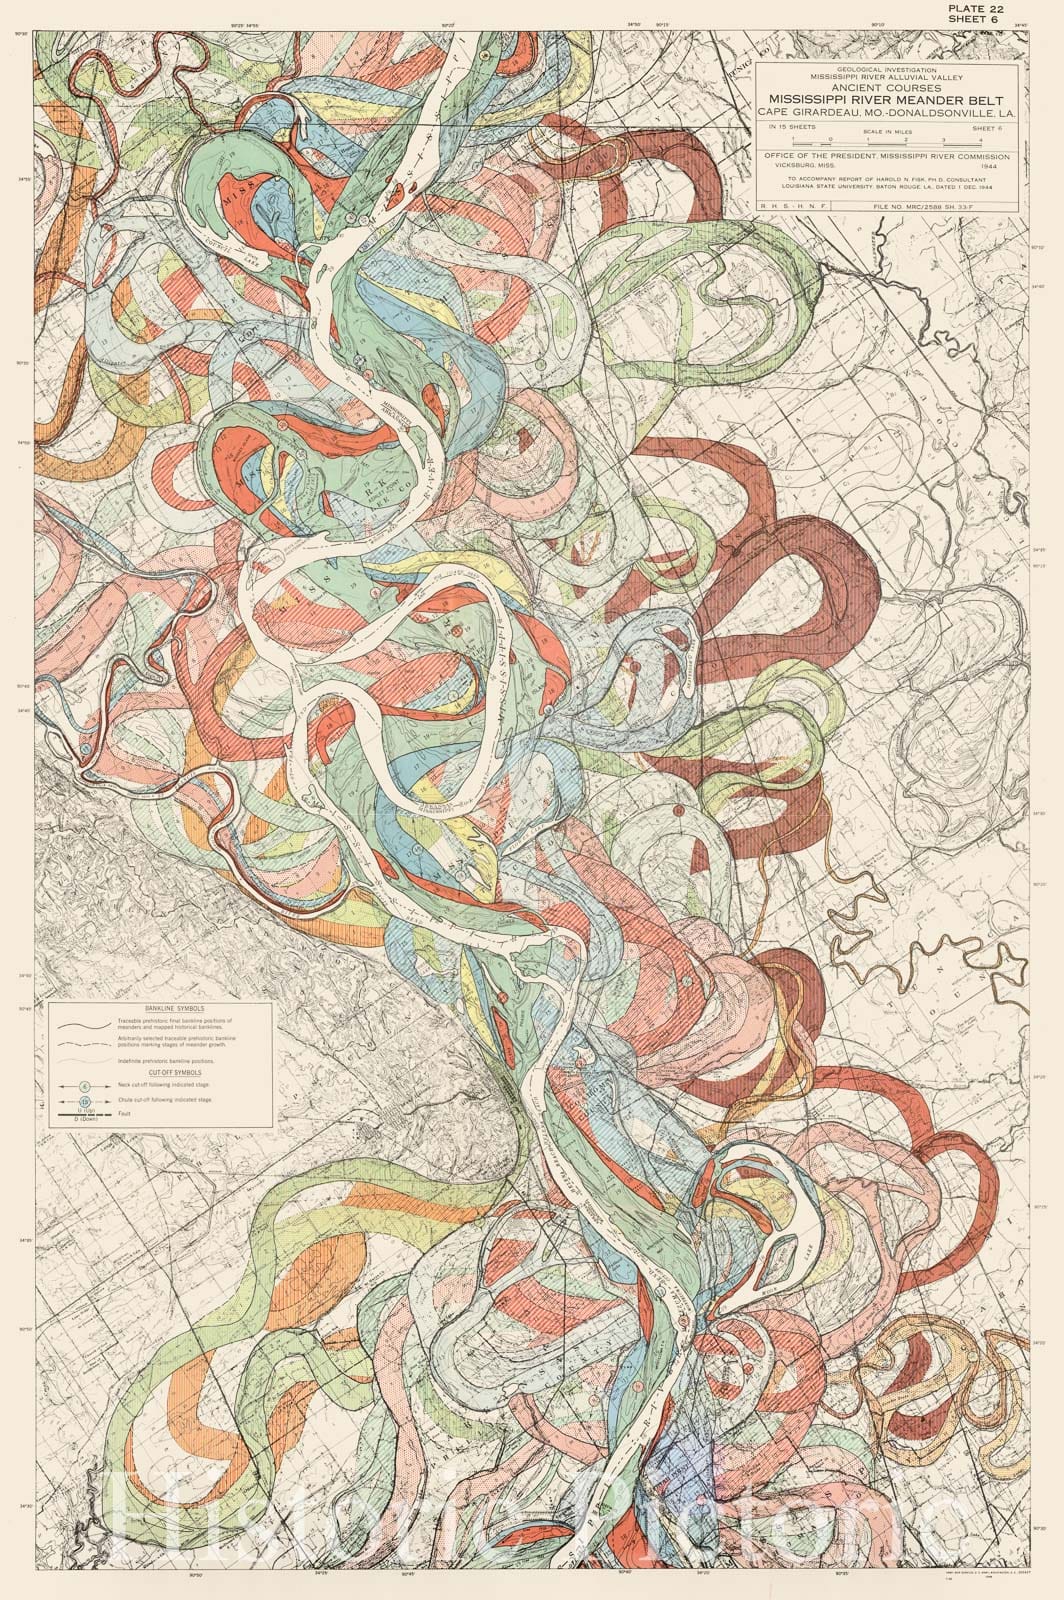 Map : Lower Mississippi River 1944 8, Geological investigation of the alluvial valley of the lower Mississippi river , Antique Vintage Reproduction